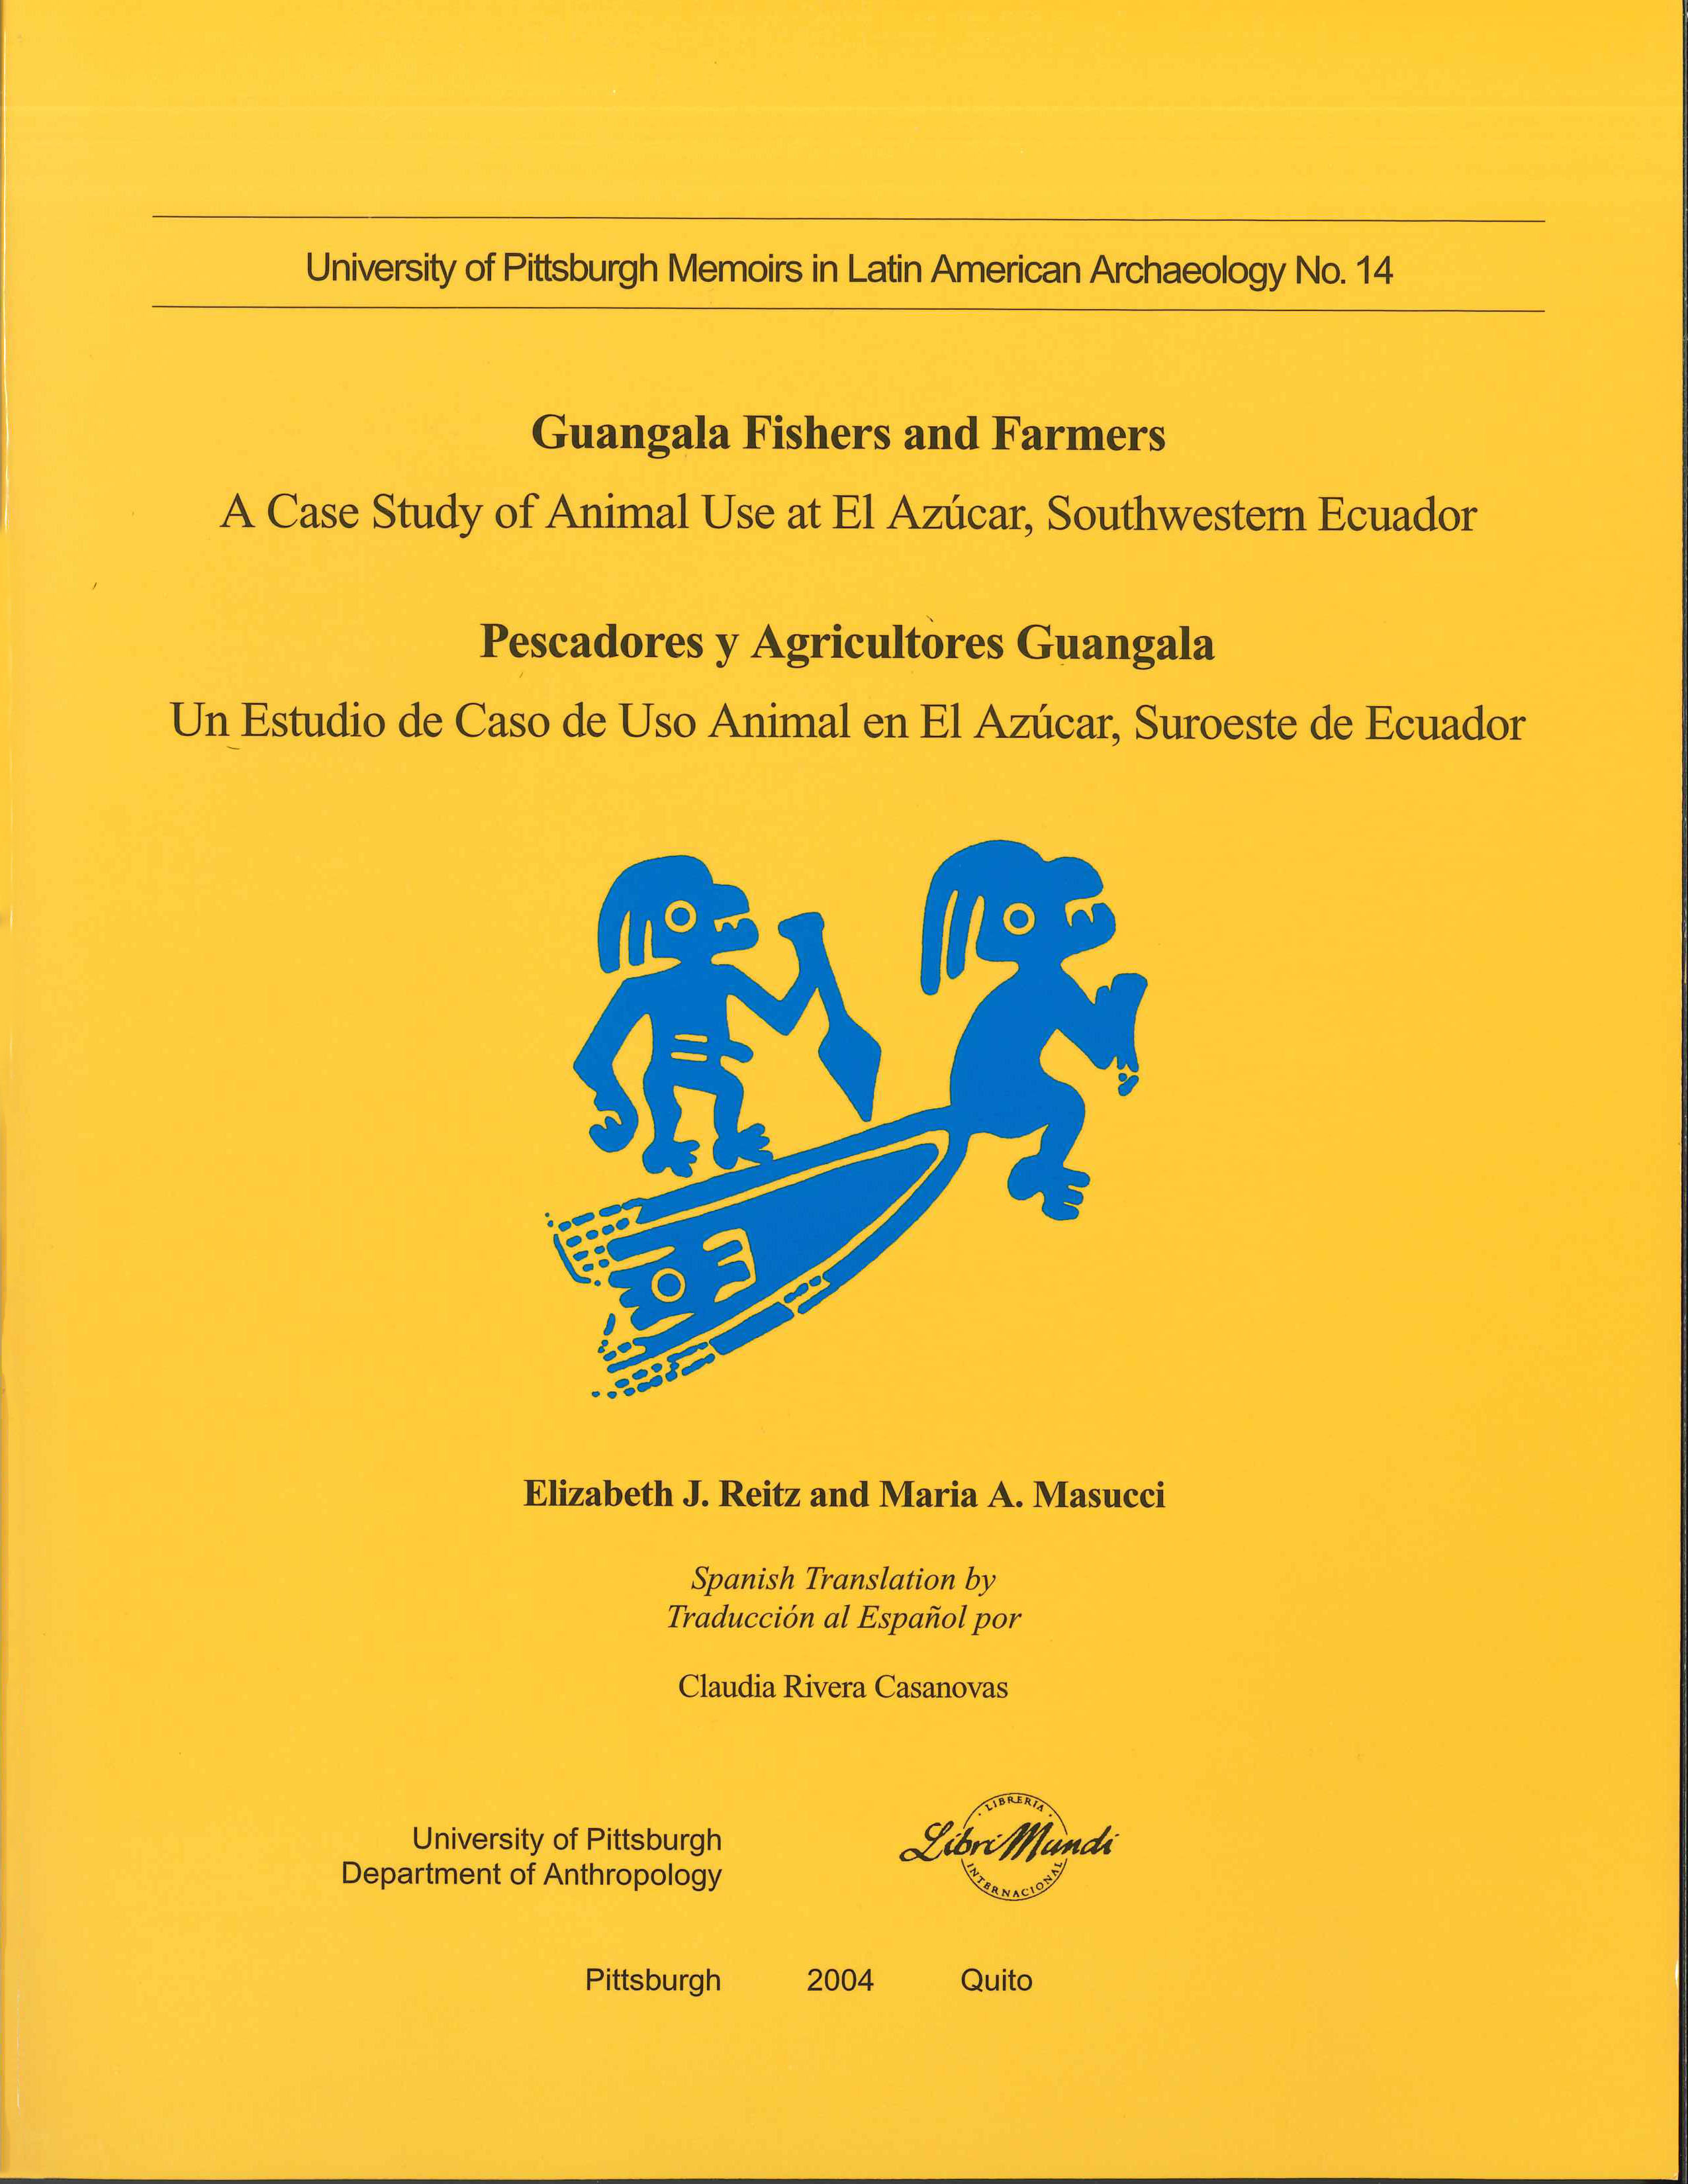 Guangala fishers and farmers cover